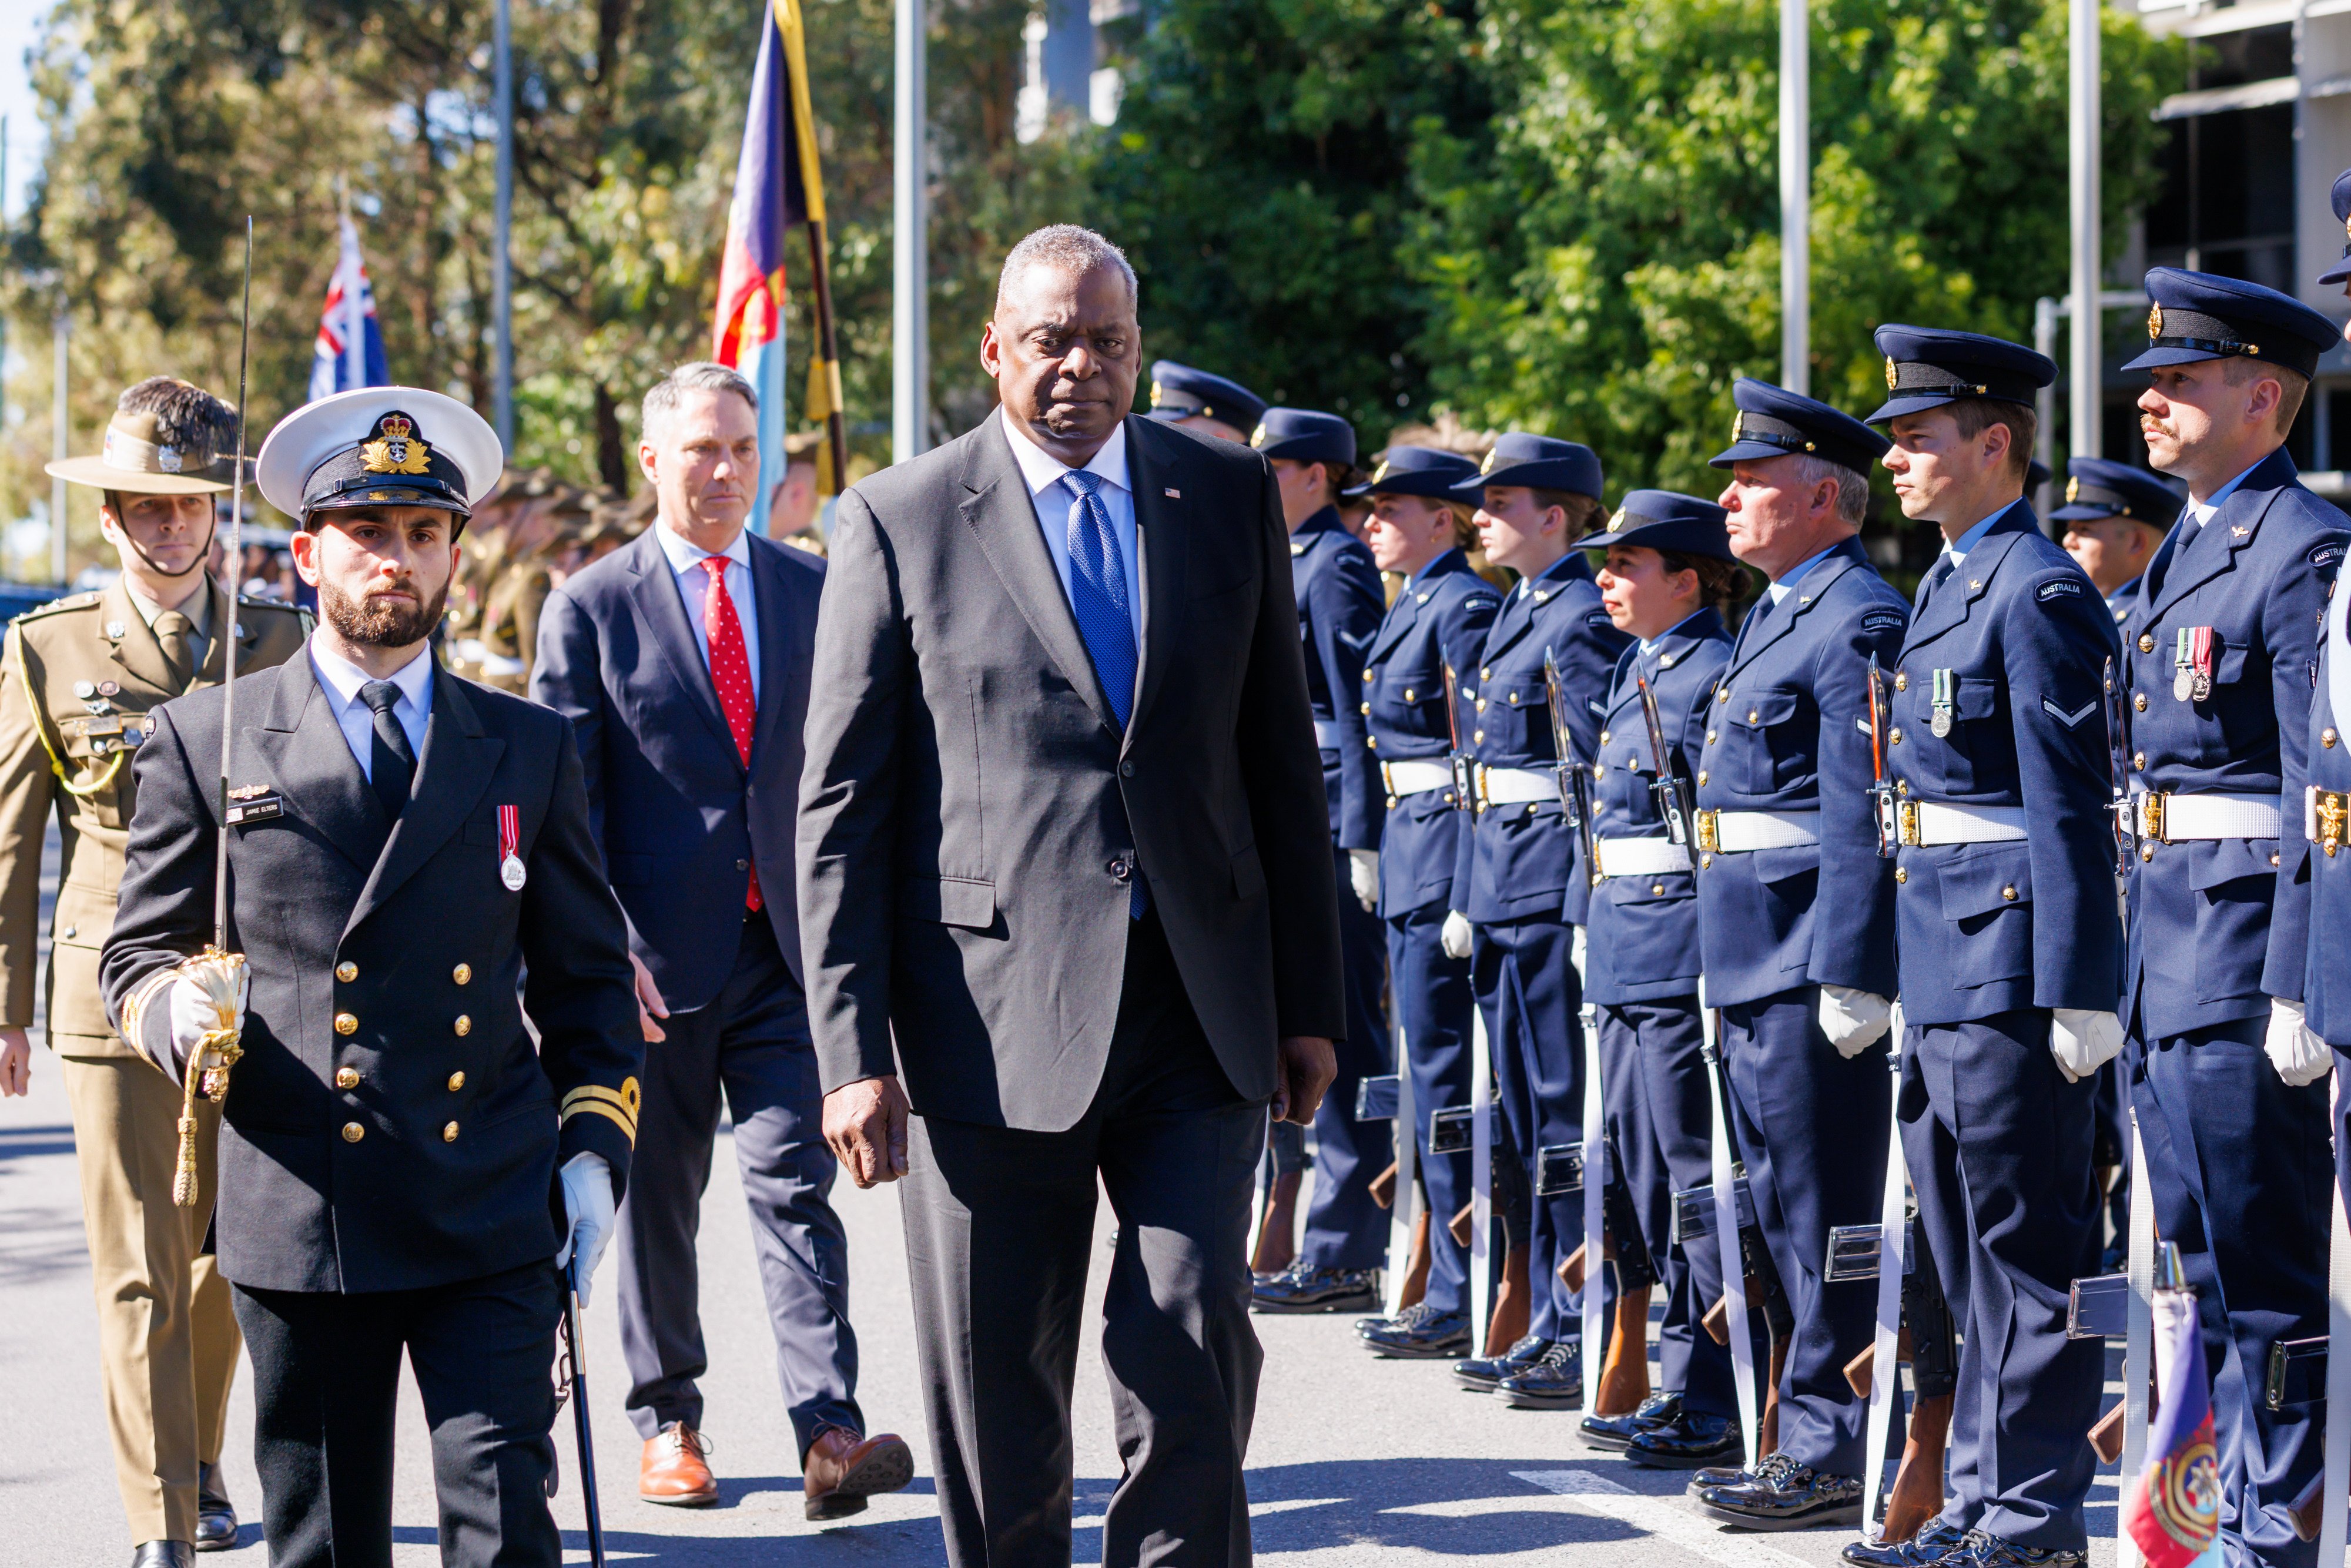 US Defence Secretary Lloyd Austin (centre) is followed by Australian Defence Minister Richard Marles as they inspect the military guard during a meeting ahead of the Australia-United States Ministerial Consultations in Brisbane, on July 28. Photo: Bloomberg